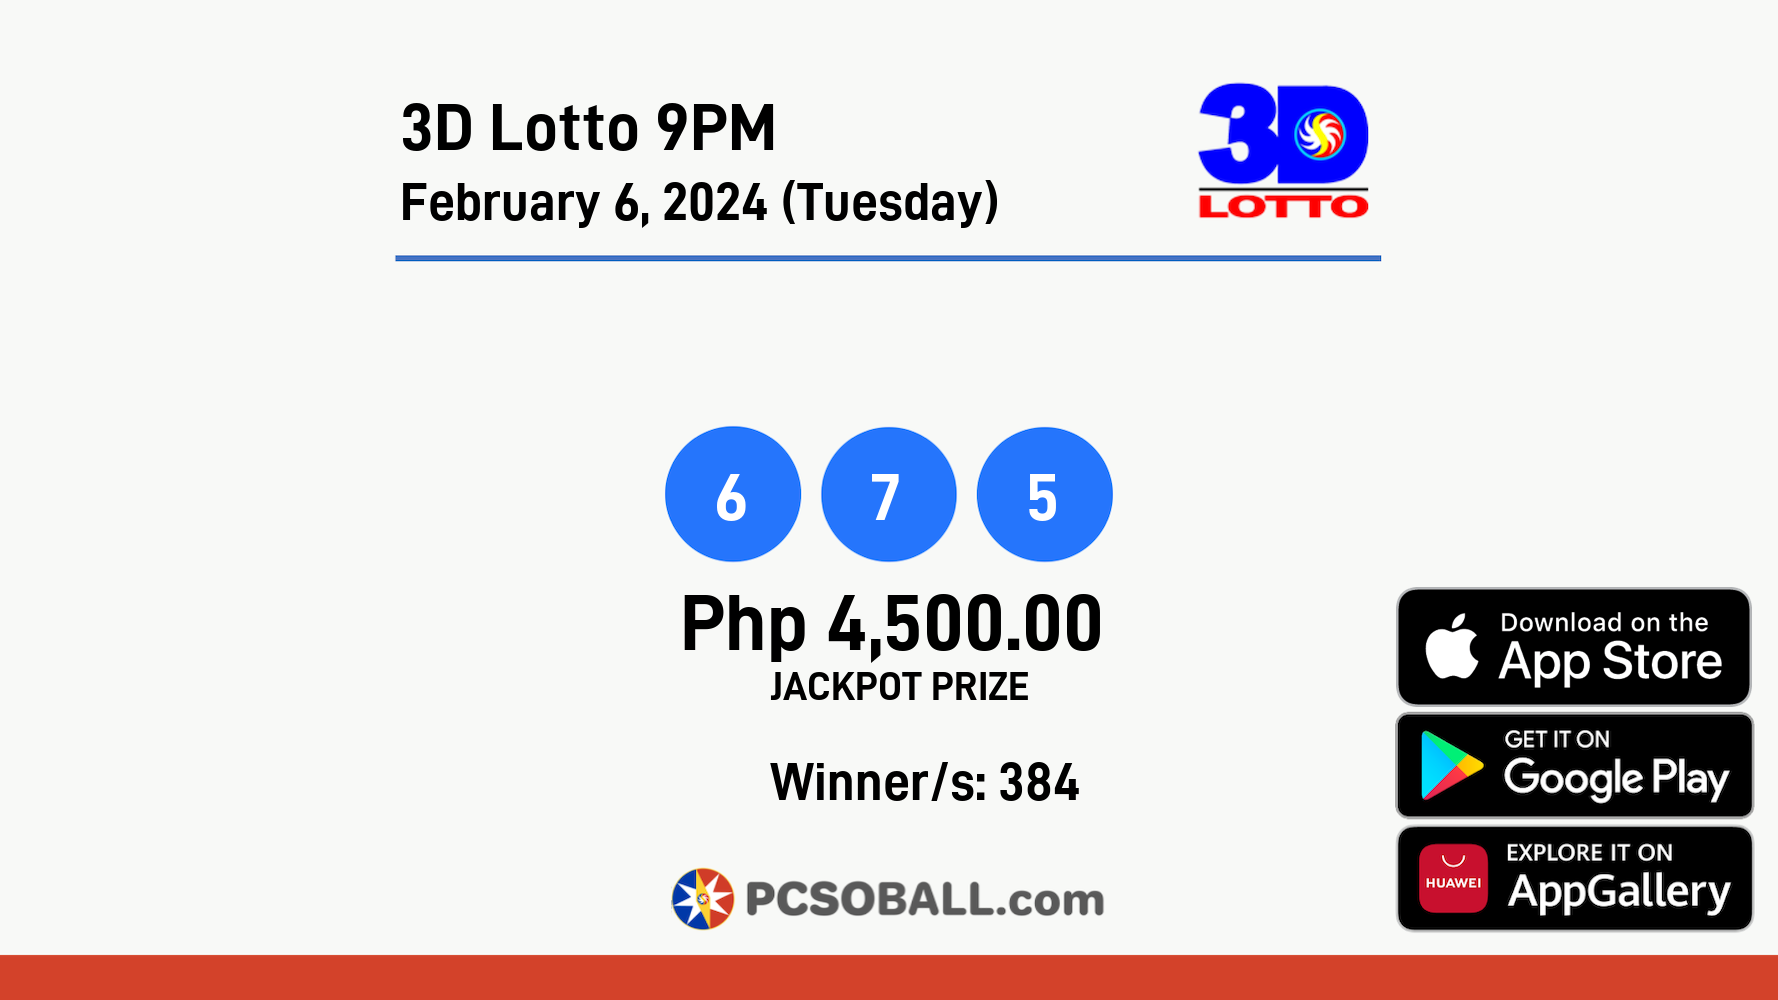 3D Lotto 9PM February 6, 2024 (Tuesday) Result